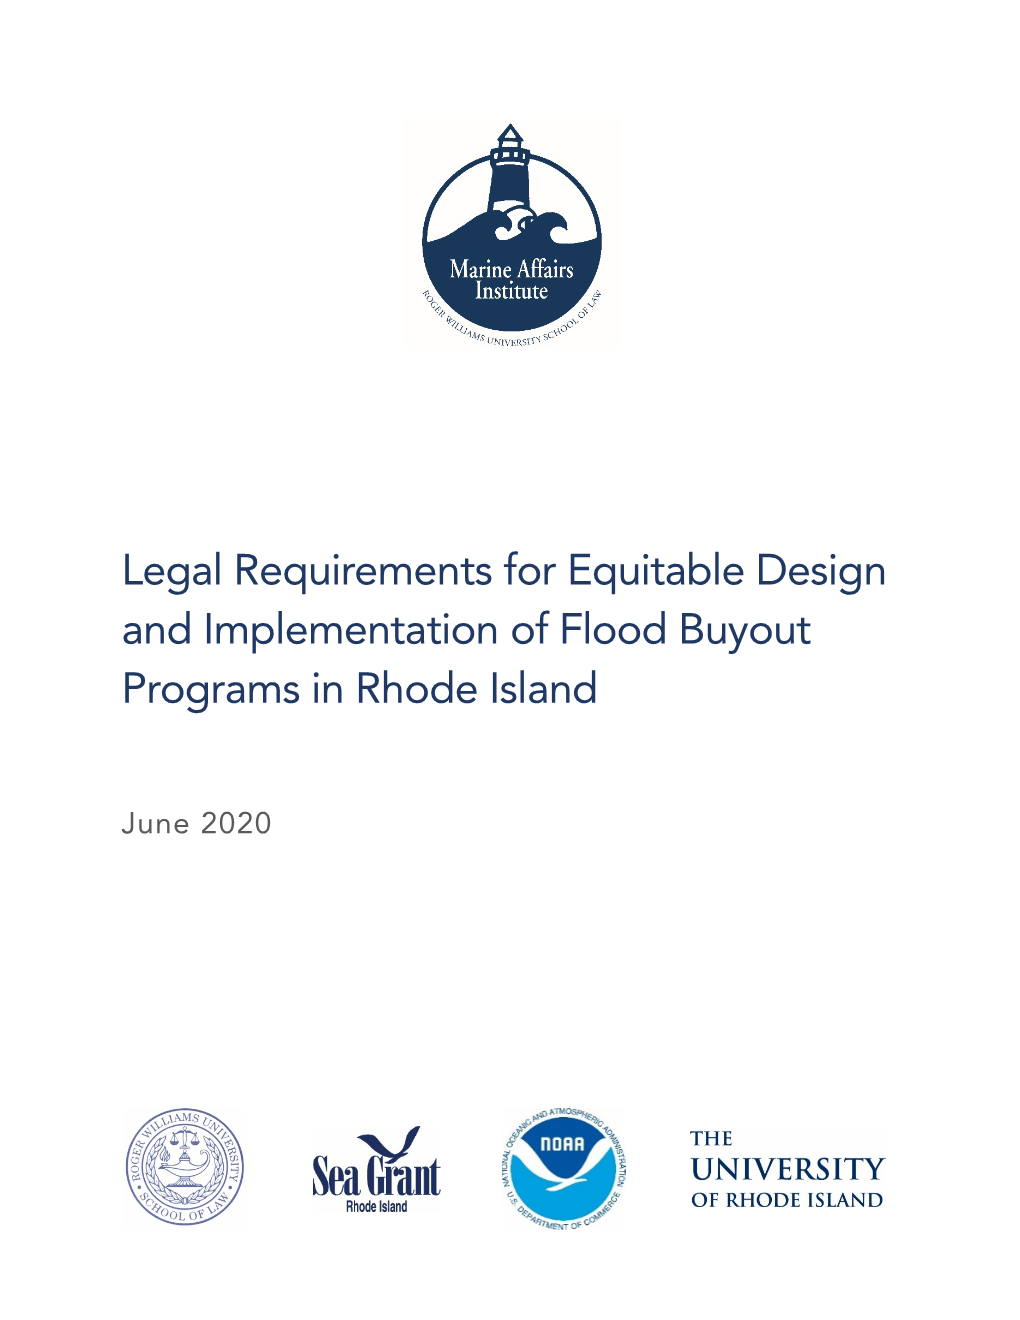 Legal Requirements for Equitable Design and Implementation of Flood Buyout Programs in Rhode Island